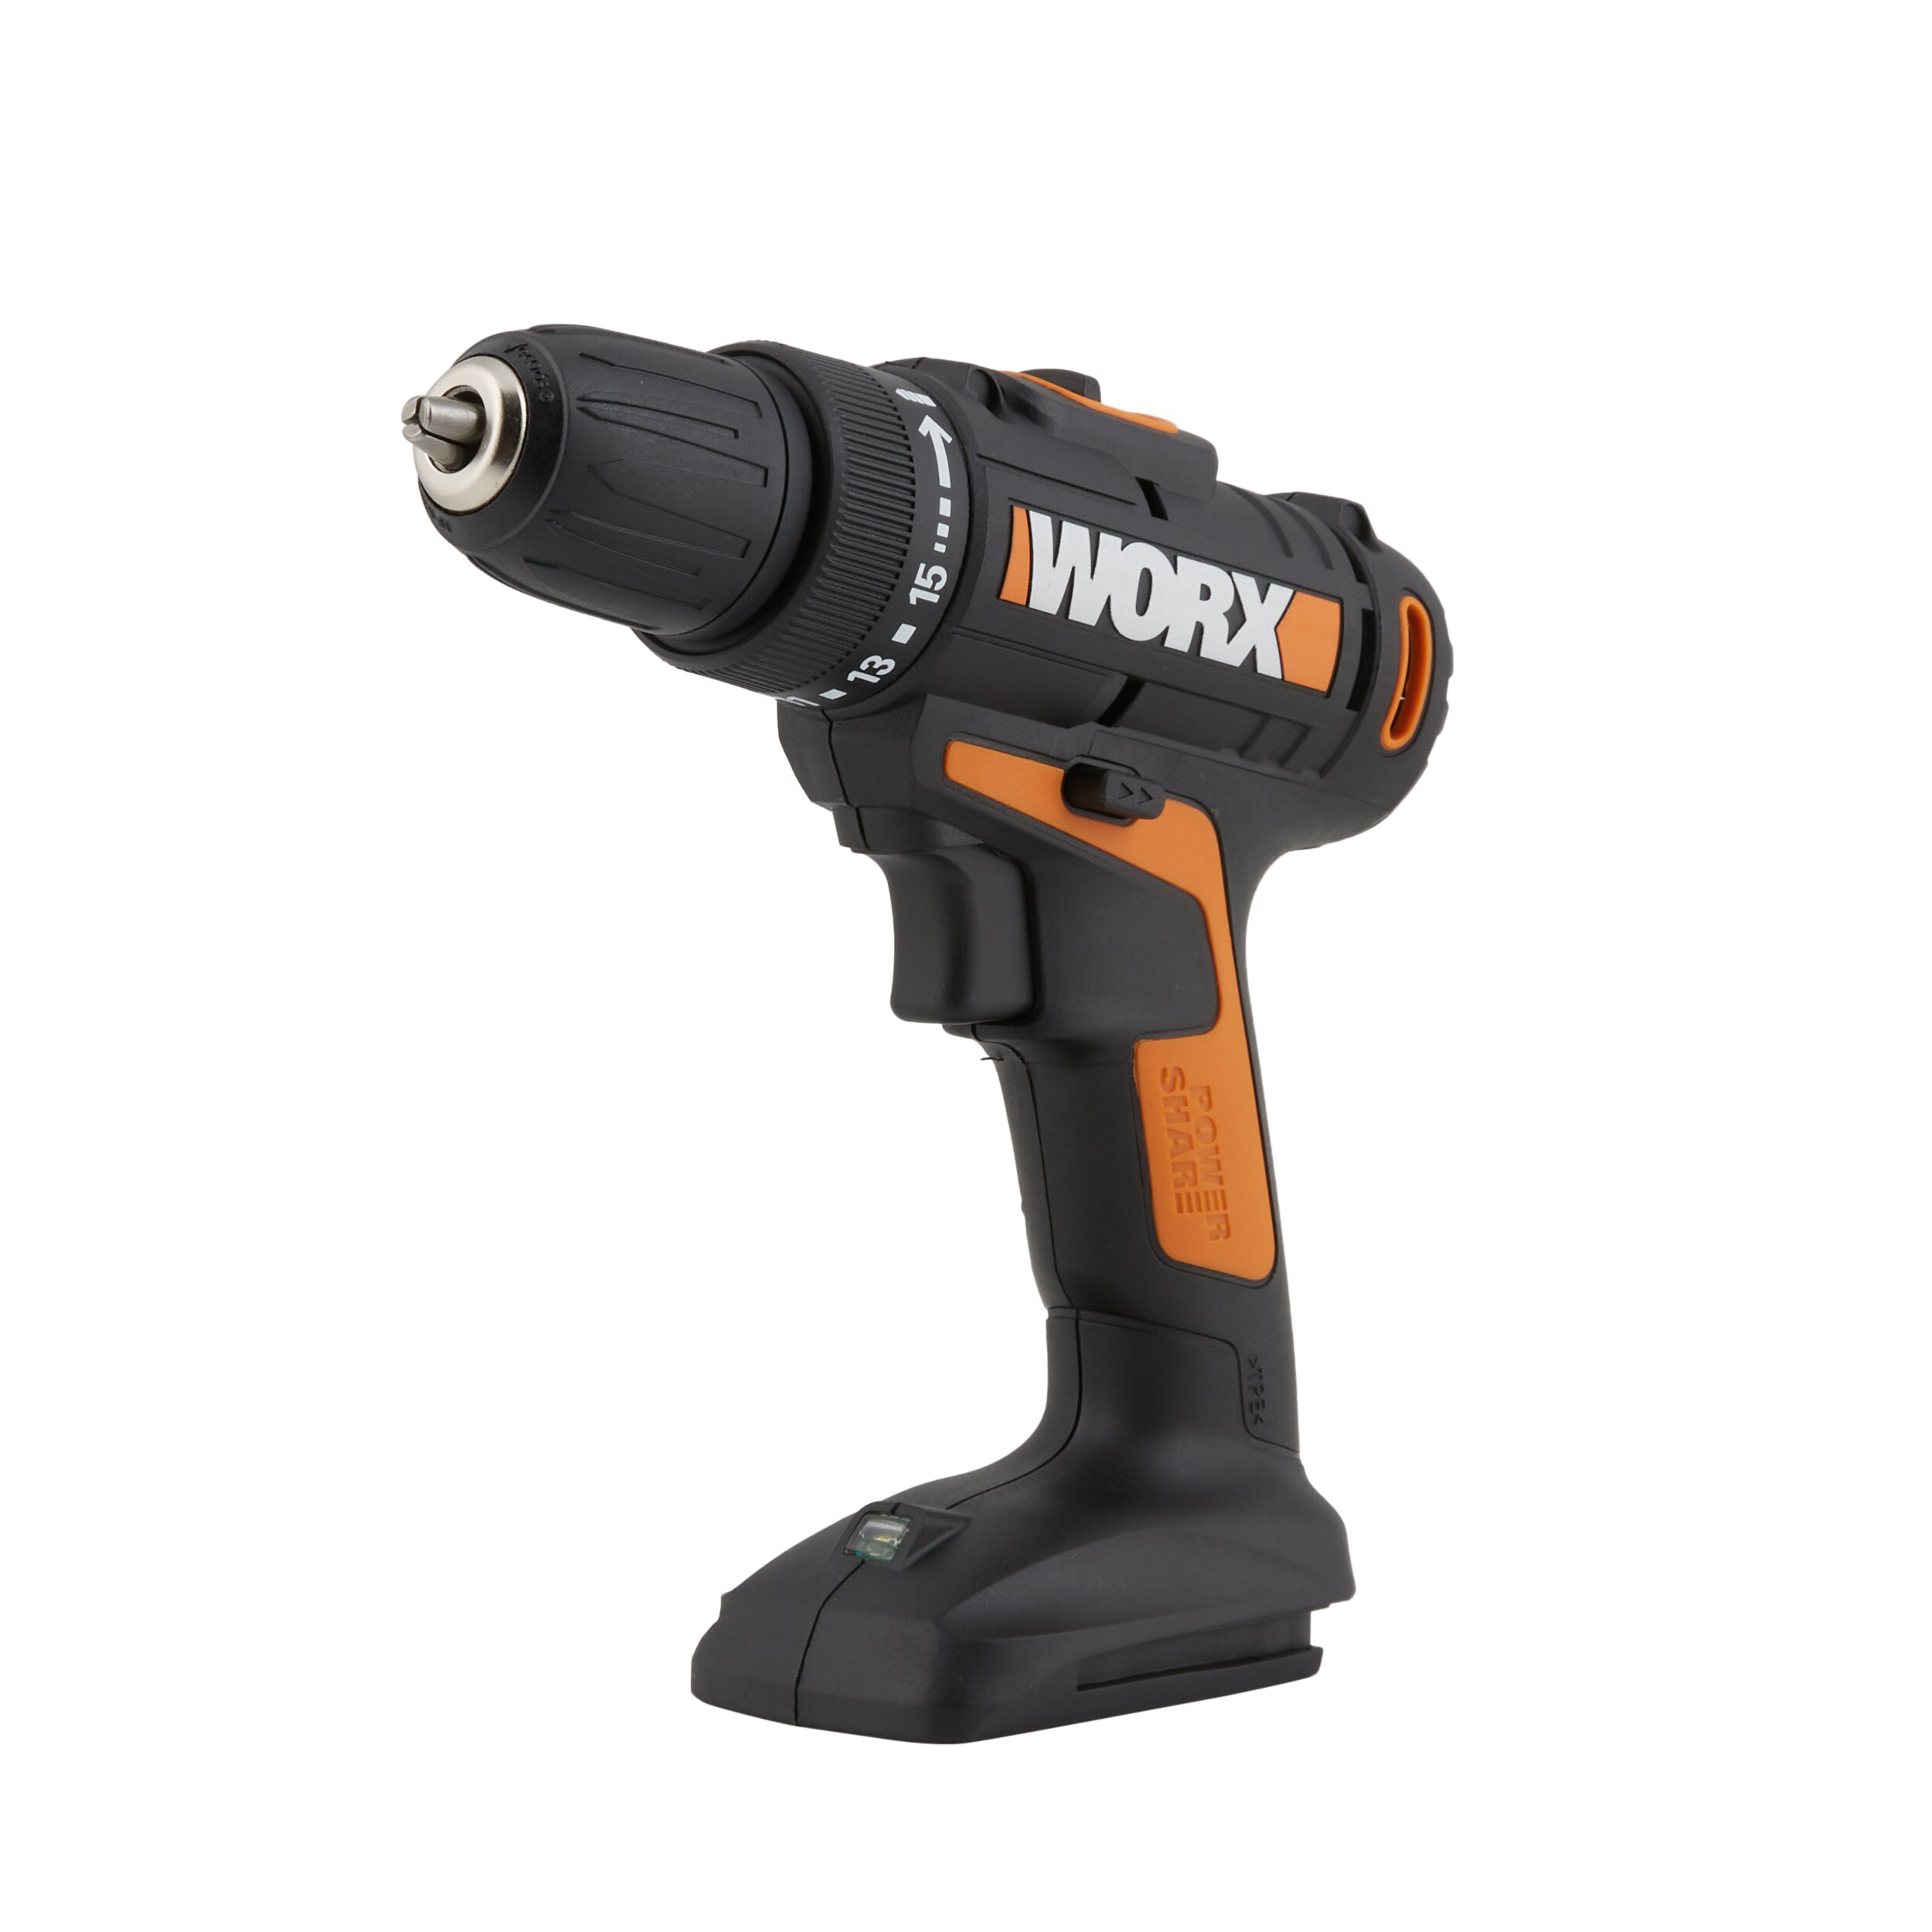 WORX WX169L 20-Volt Lithium-Ion 3/8 in Drill Driver with Driver bits TOOL ONLY 